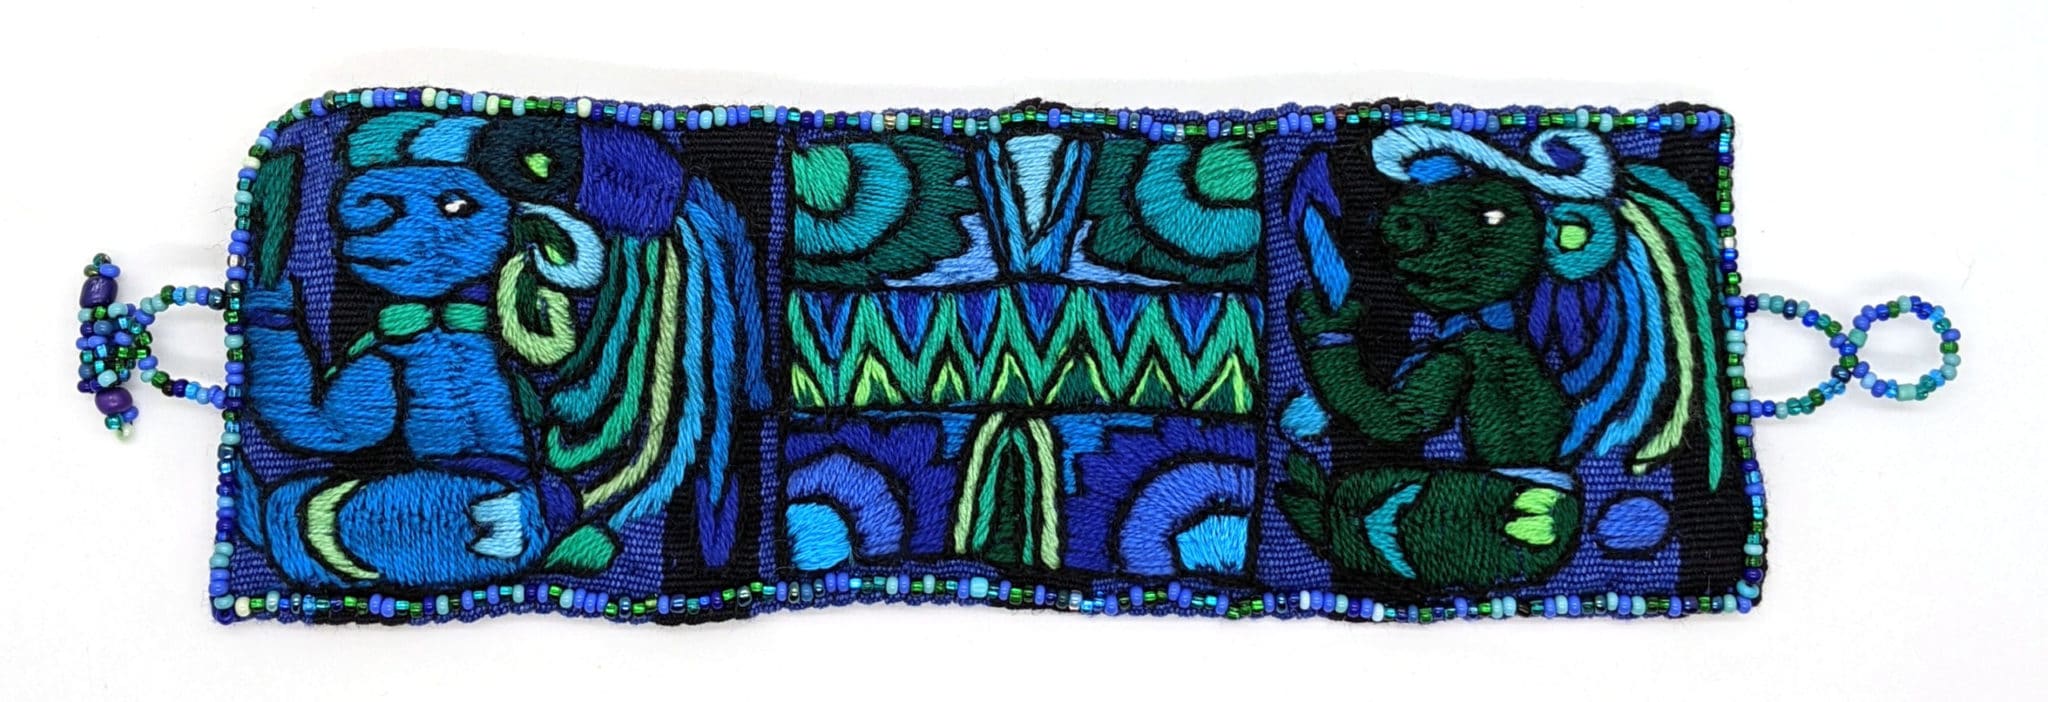 Blues and Greens Maya Gods and Symbols Hand-Embroidered Bracelet with Glass Beads Closure